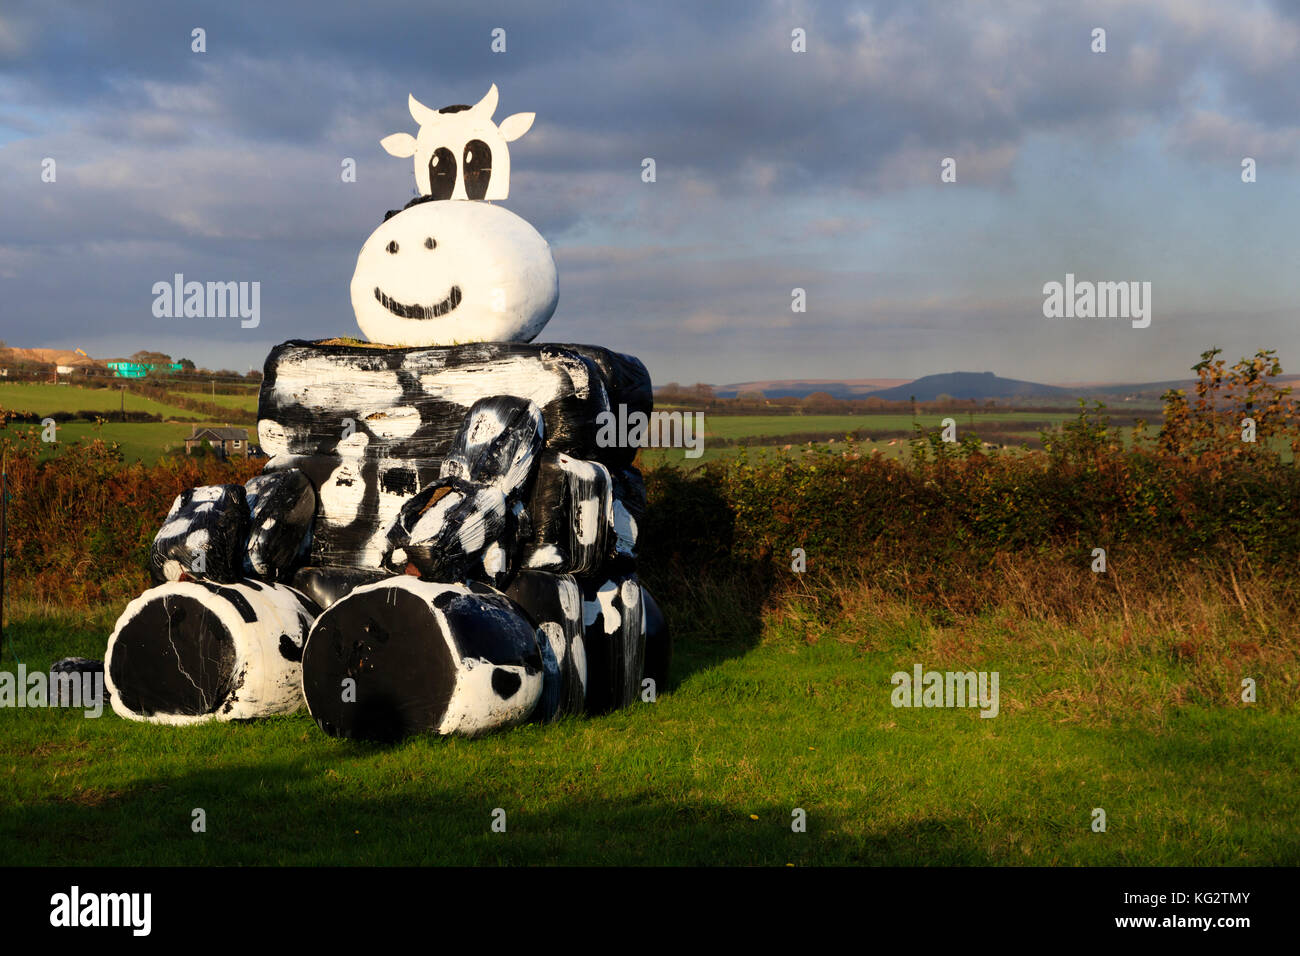 Black plastic coated hay bales for winter fodder arranged and painted to resemble a black and white cow Stock Photo